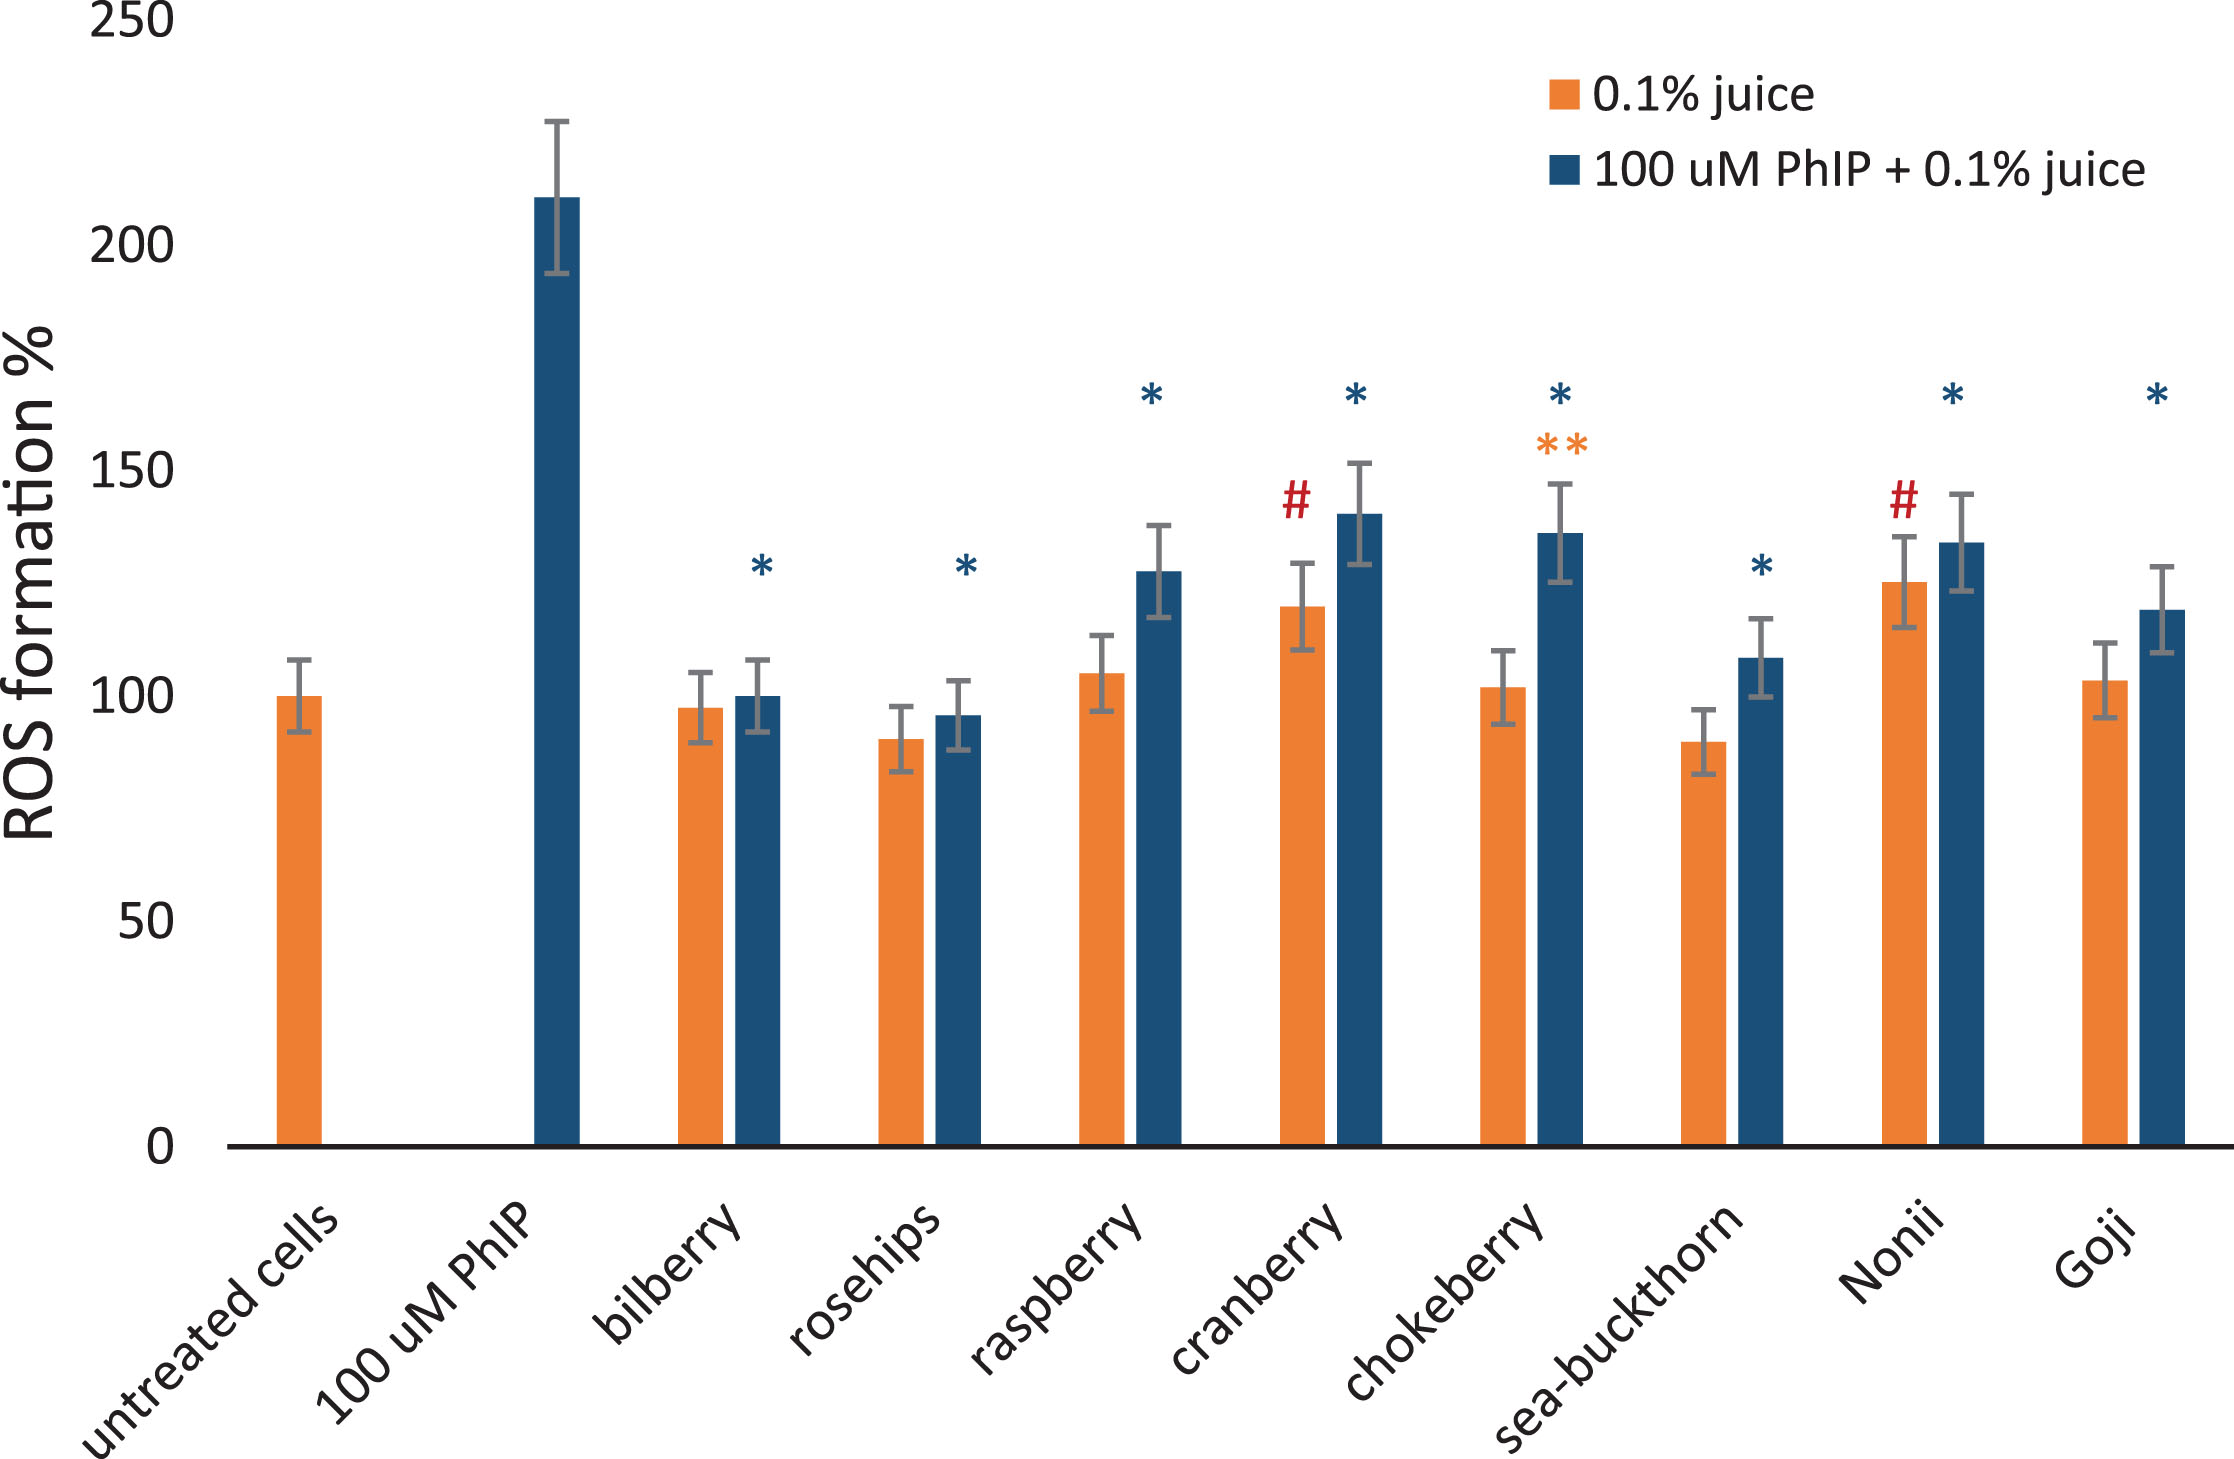 The effect of berry juices on ROS induced in lymphocytes by PhIP. Reactive oxygen species formation measured using DCFH-DA probe in lymphocytes at a density of 1×105 cells/ml exposed for 1 hour to different 0.1% berry juices alone and to 0.1% juices and 100 μM aromatic amine PhIP simultaneously. The results are shown as a percentage of negative control sample. 100 μM PhIP was used a positive control. *Asterisks indicate the significant differences between cell treated with juices and PhIP in comparison to cells treated with PhIP only. **Double asterisks denotes the significant difference between cells treated with juice and PhIP in comparison to juice only. # Hashes indicate significant differences between the cells treated with juice only to untreated cells.